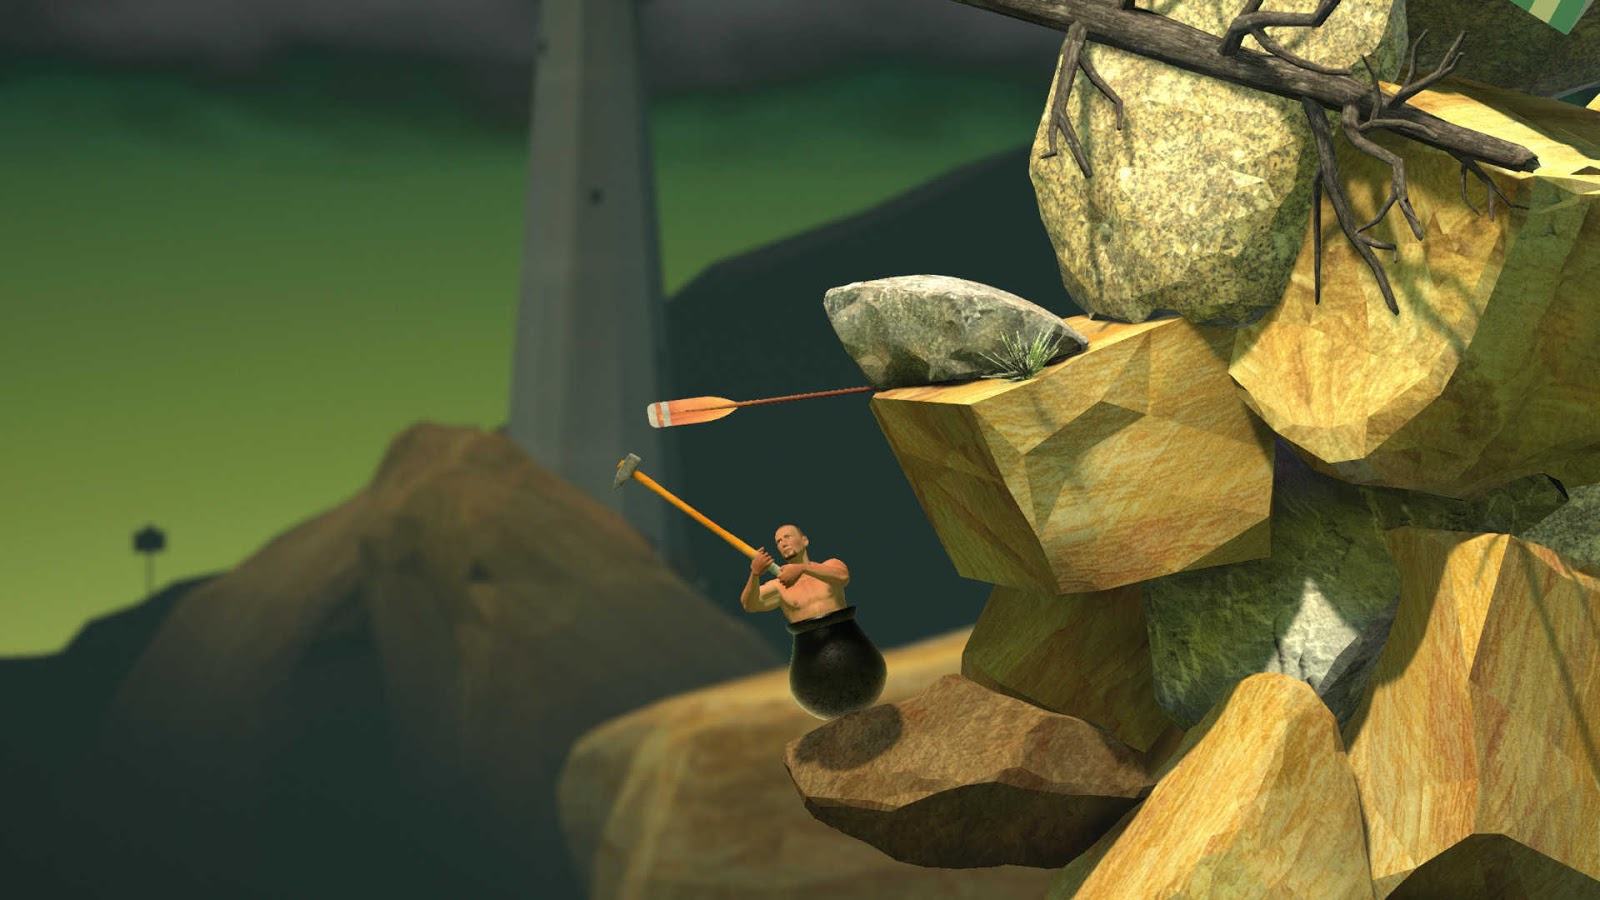 Getting Over It with Bennett Foddy 4